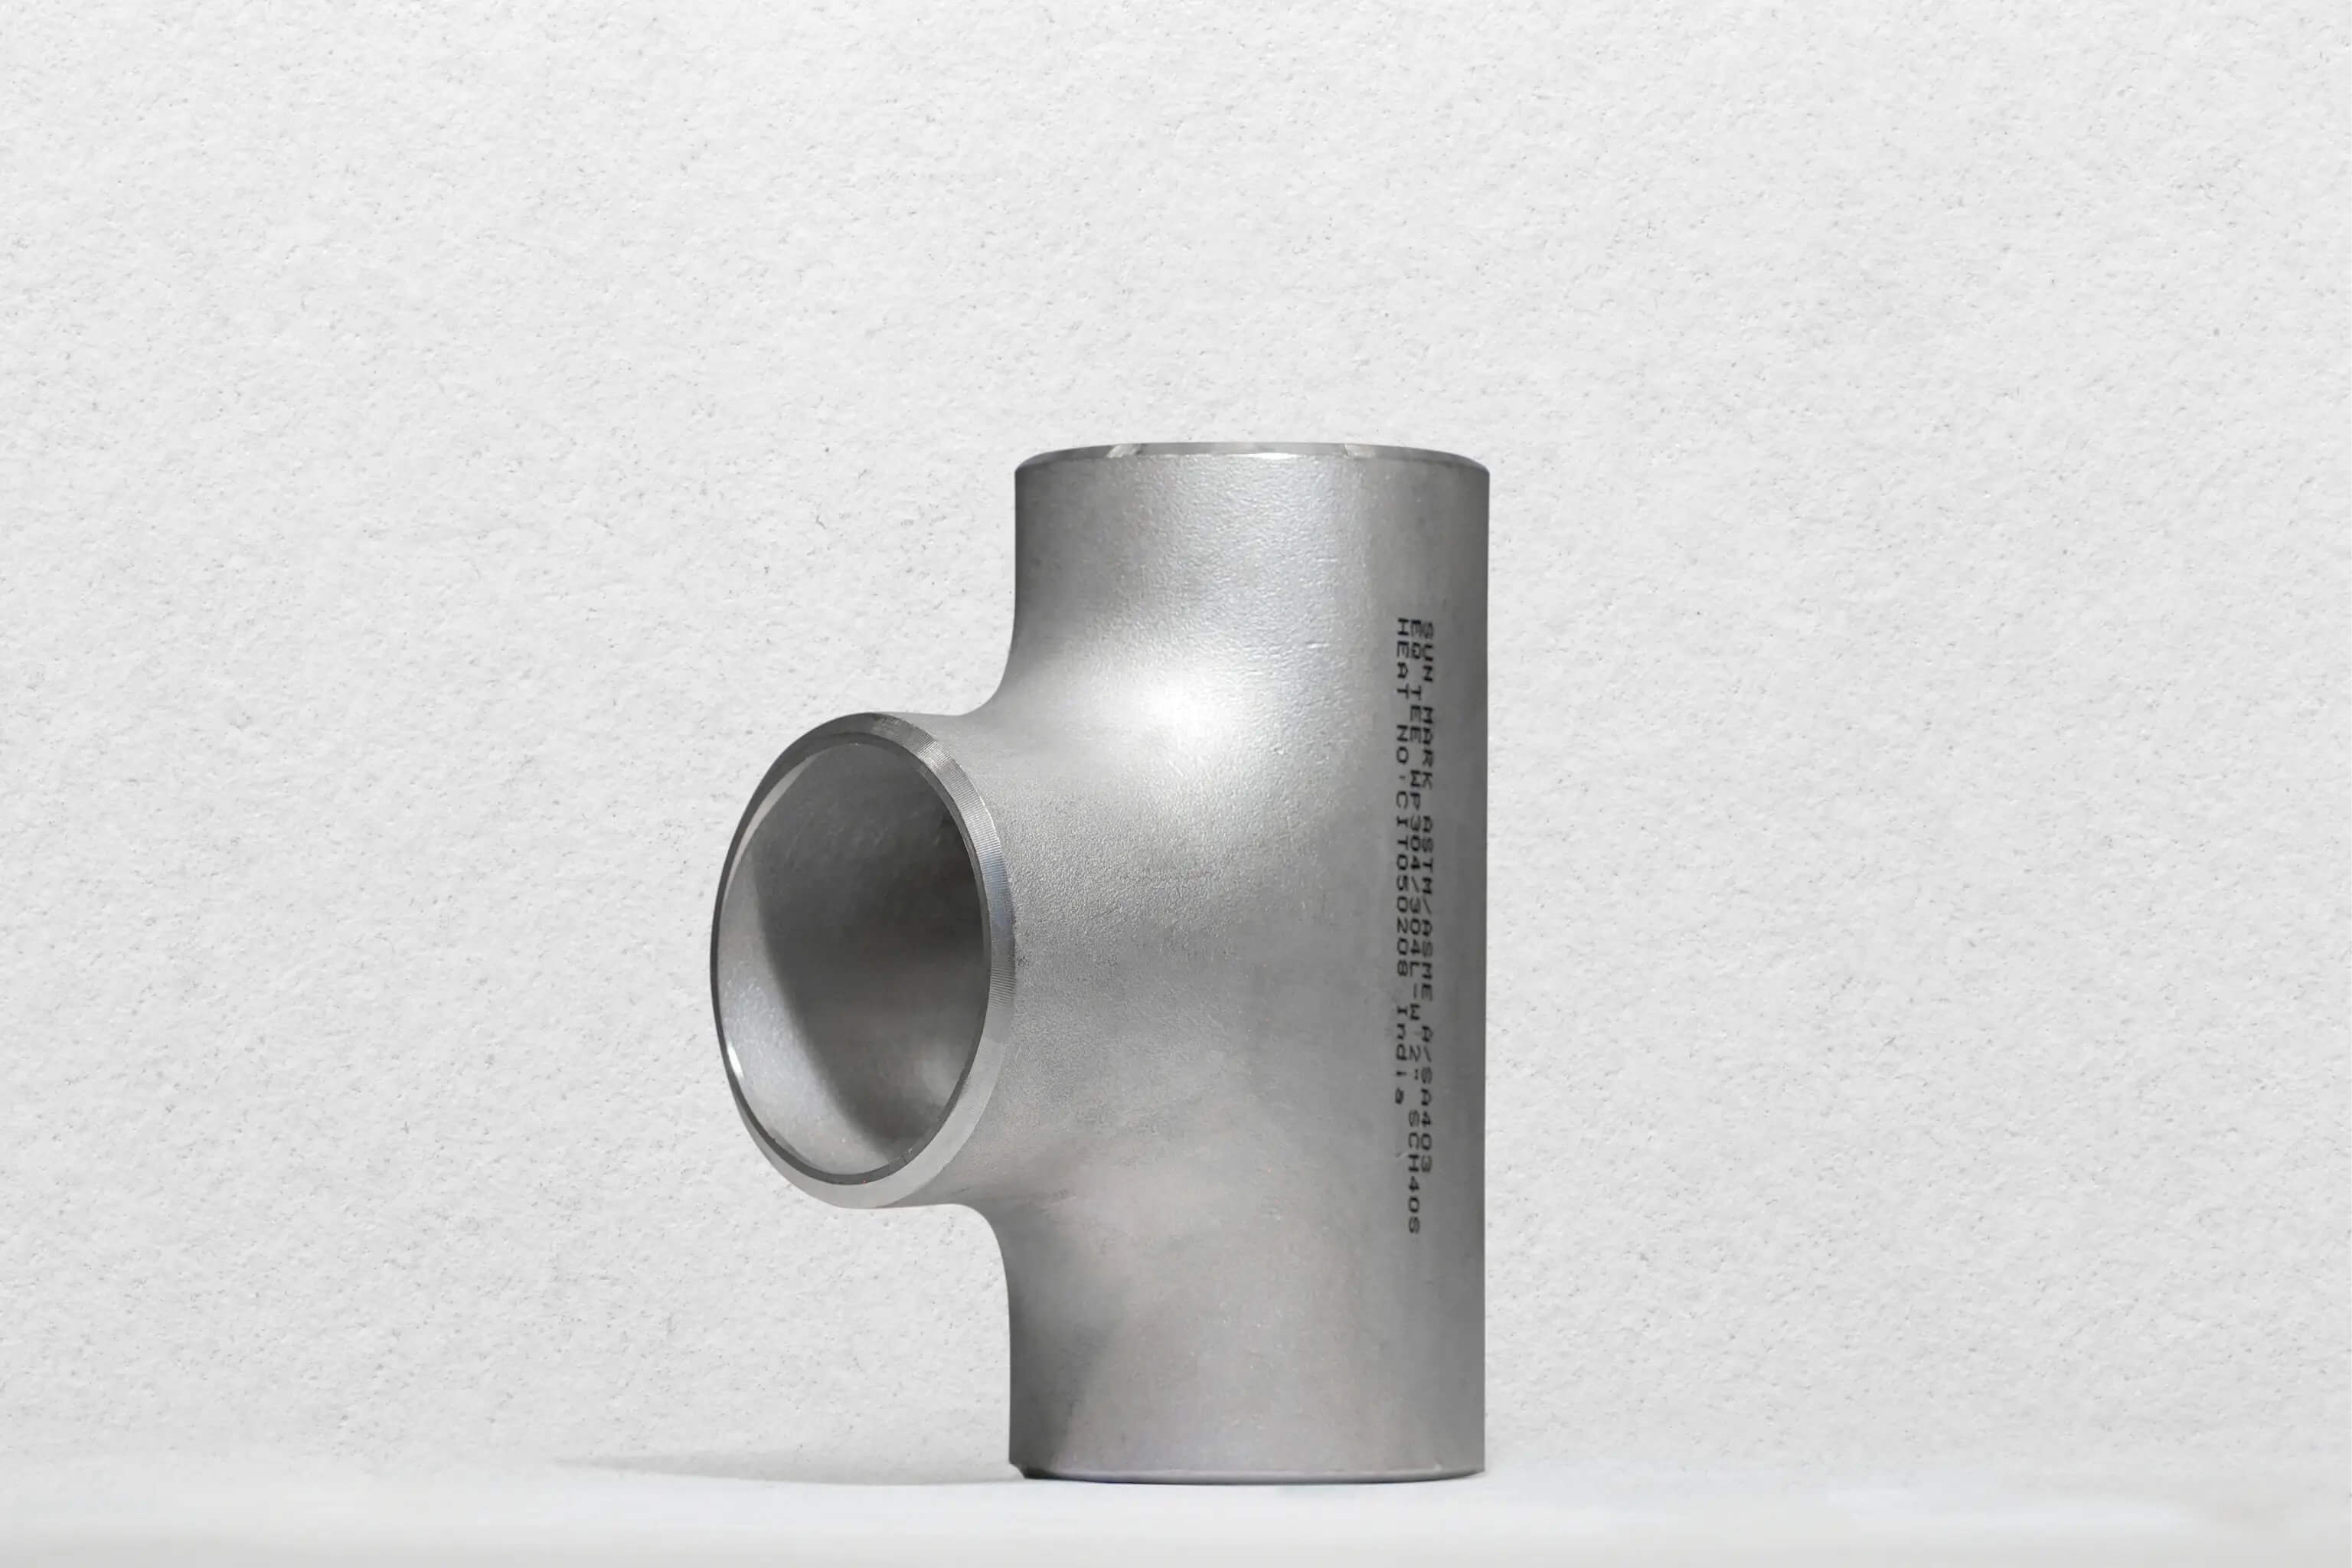 Stainless Steel Equal Tee pipe fitting